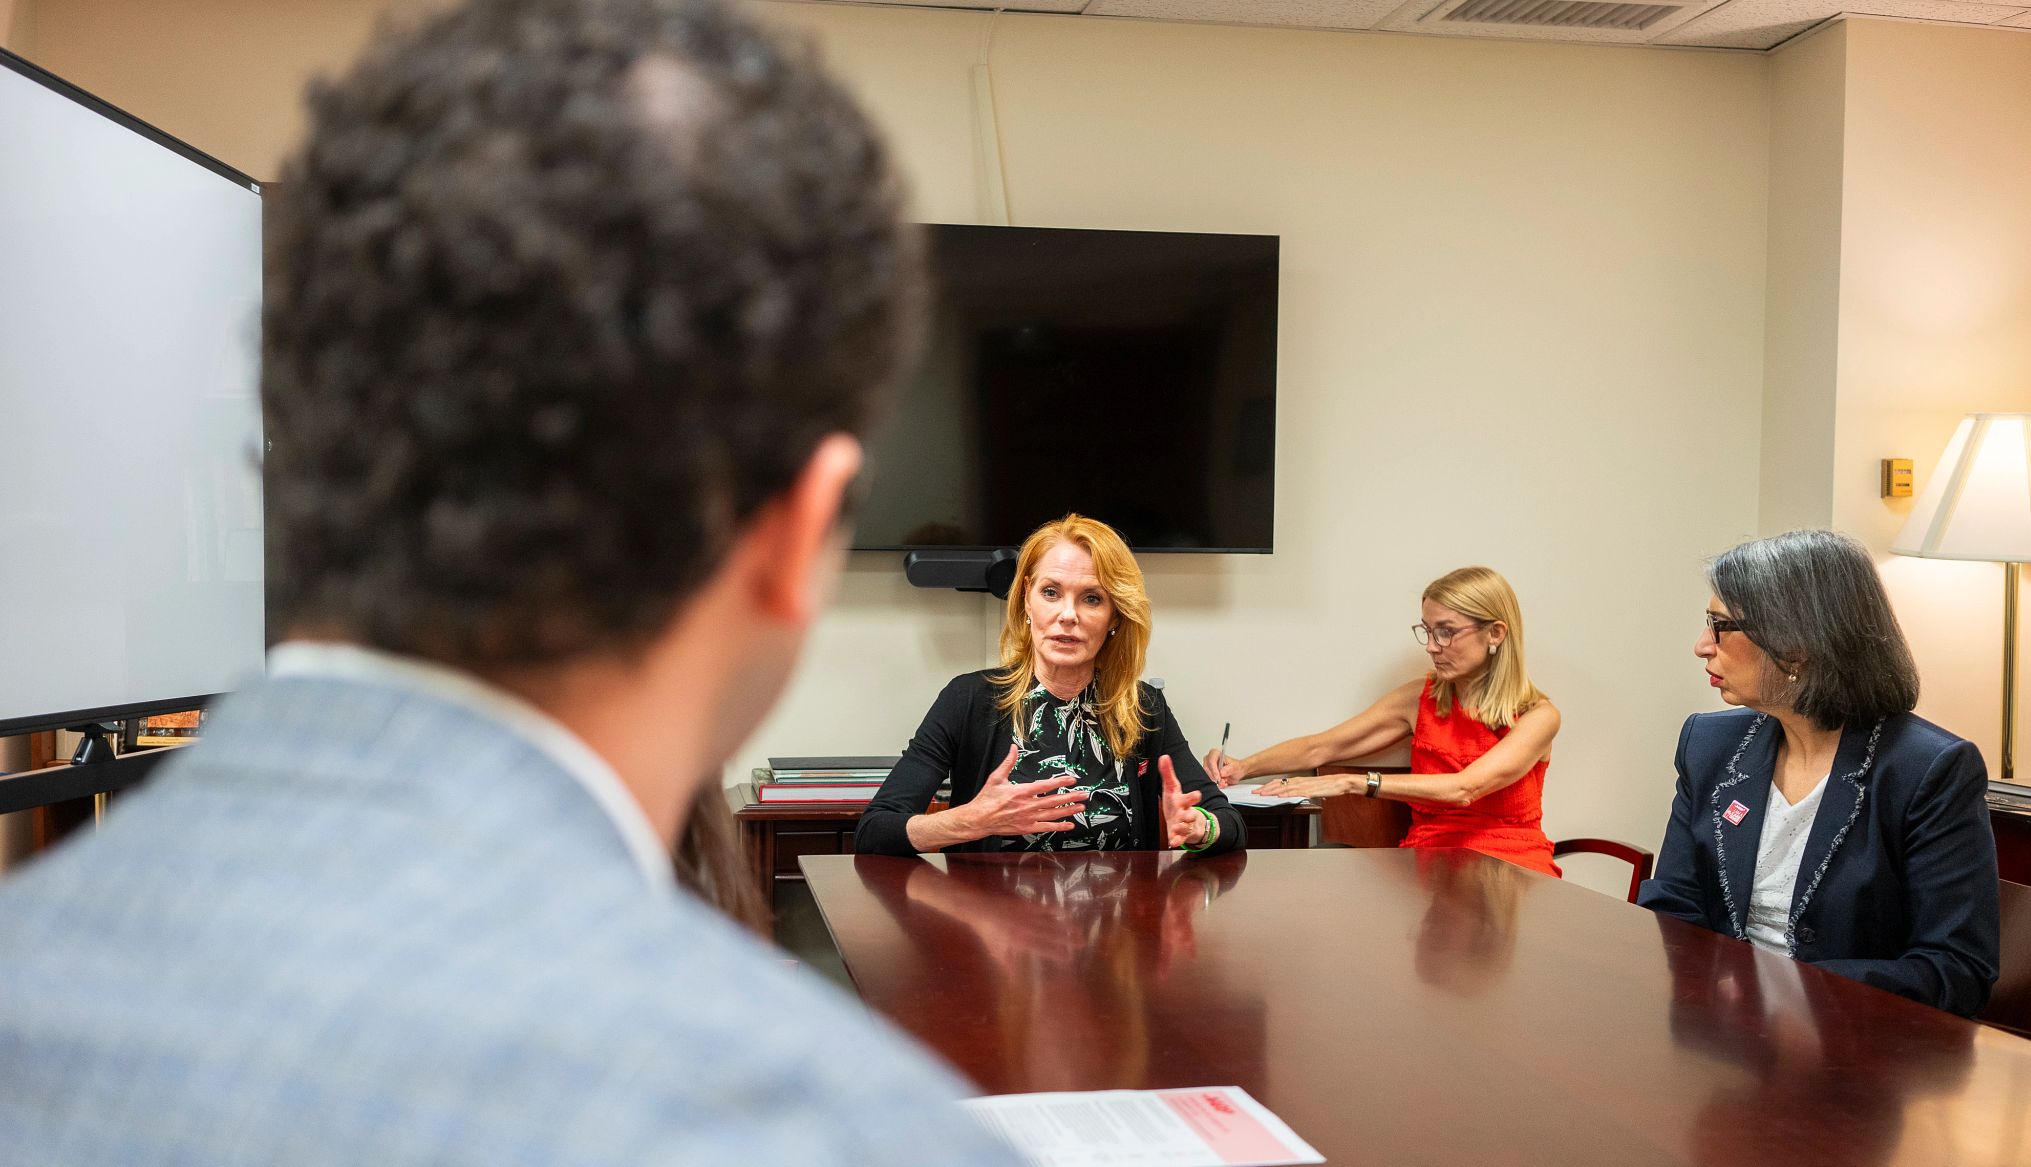 Marg Helgenberger, in a printed black dress and black sweater, speaks while sitting at a conference table.